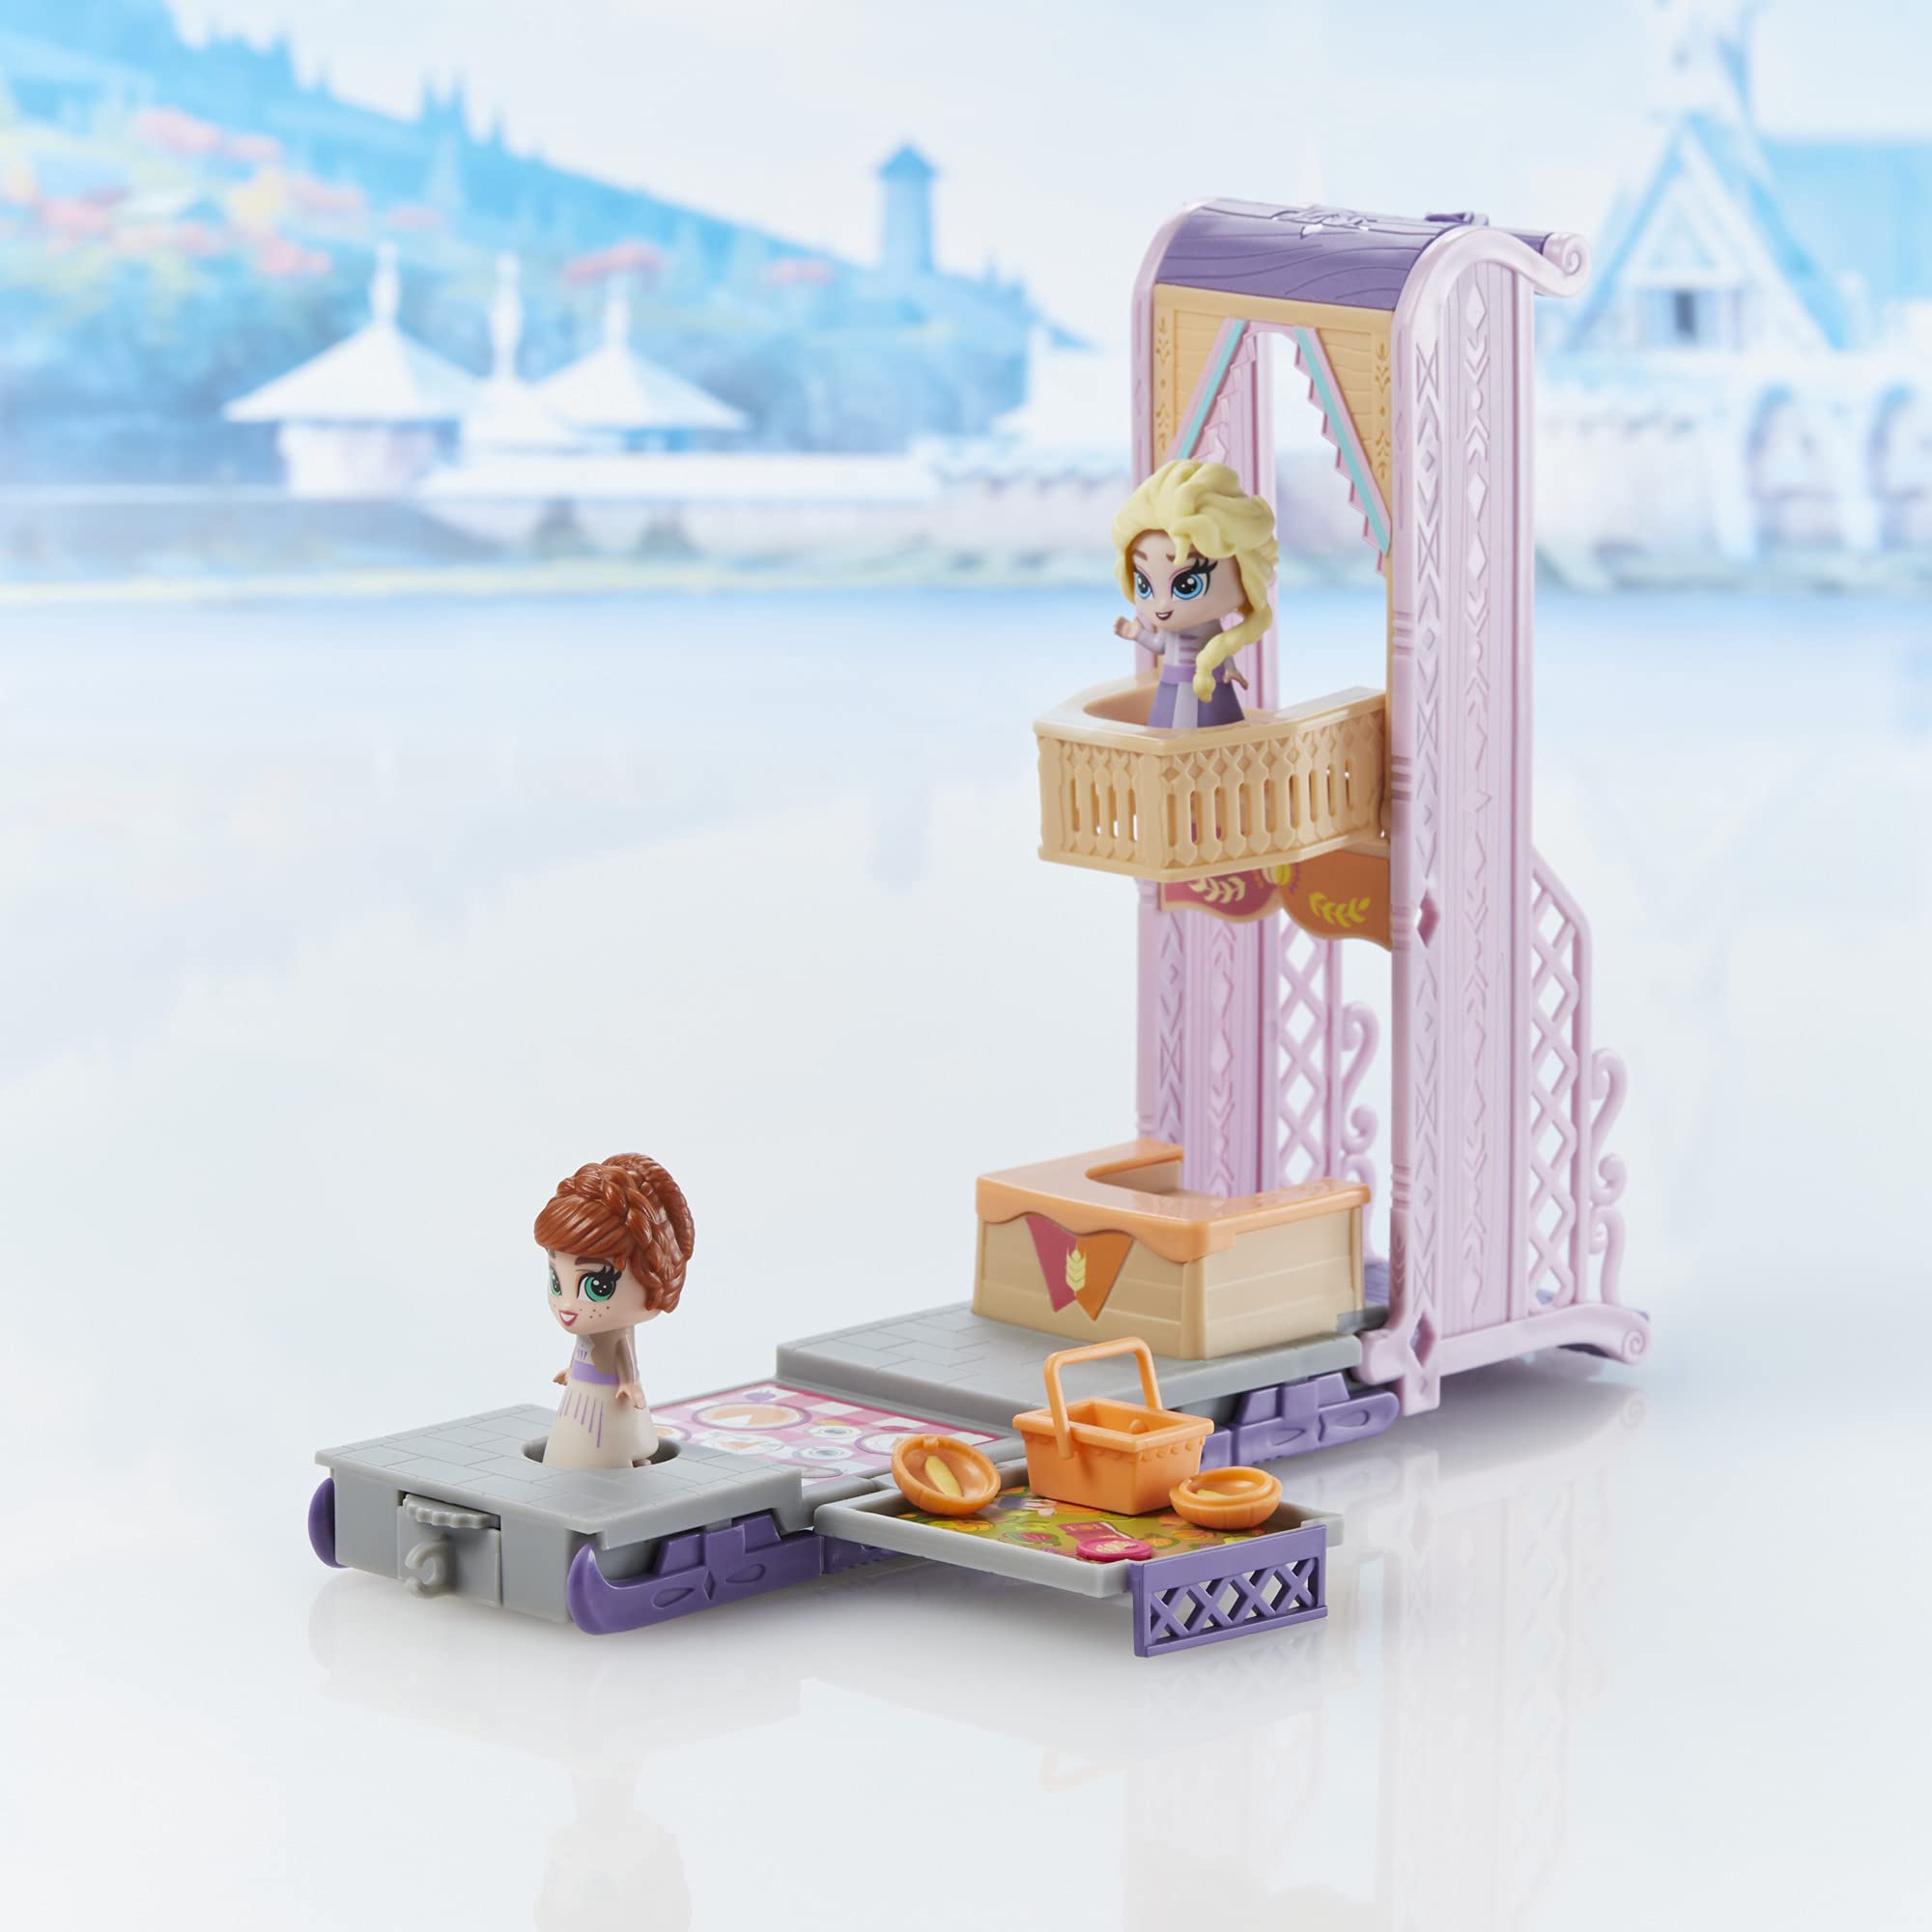 Disney Frozen Hasbro 2 Twirlabouts Picnic Playset Sled-to-Castle with Elsa and Anna Dolls and Accessories, Toys for Kids Ages 3 and Up